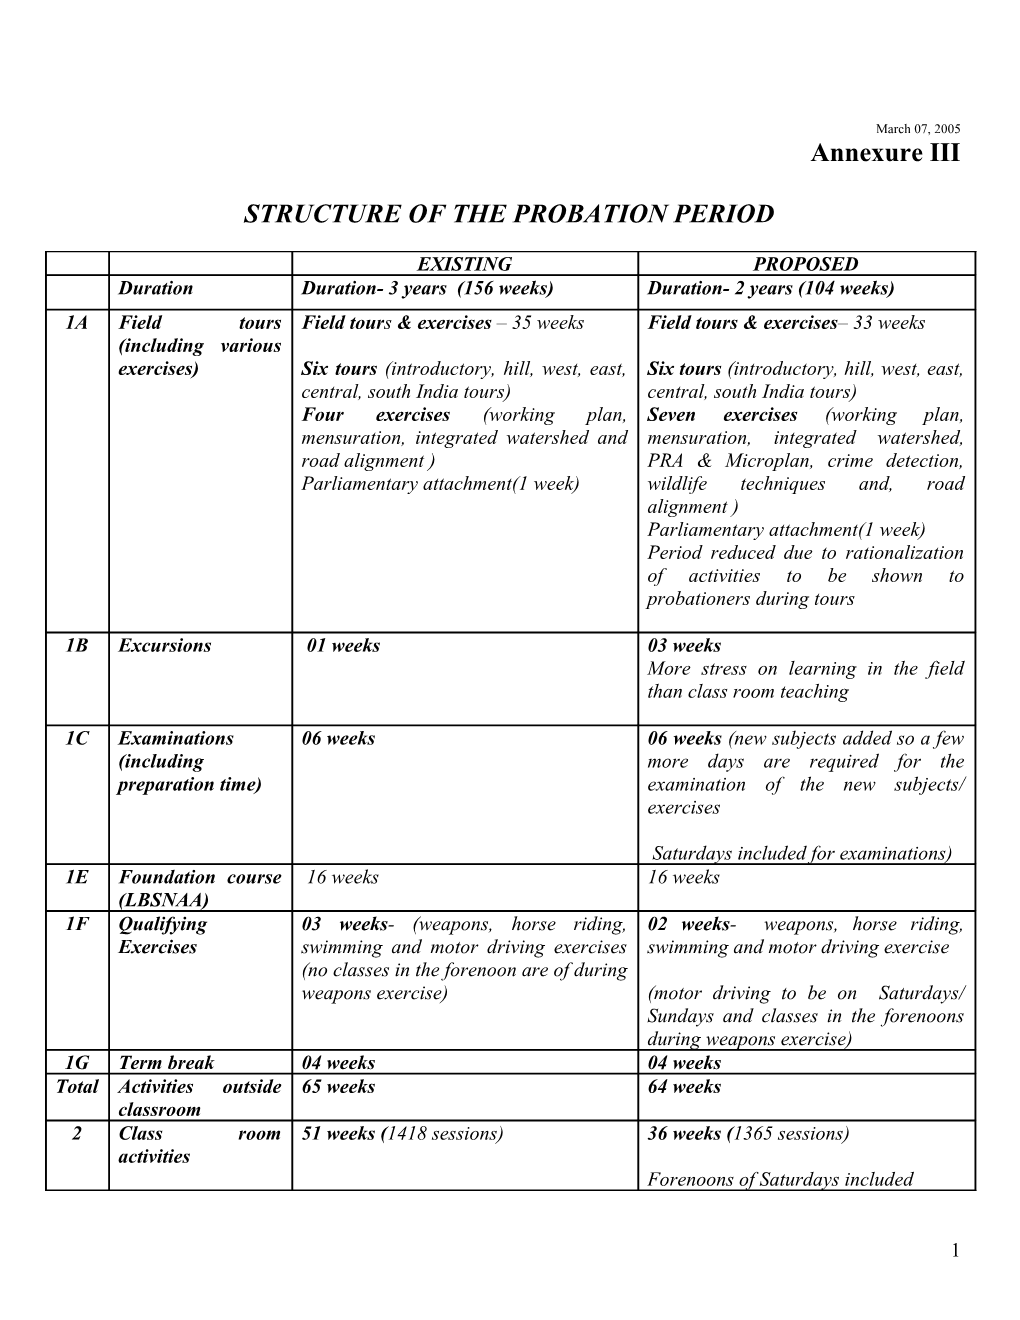 Structure of the Probation Period